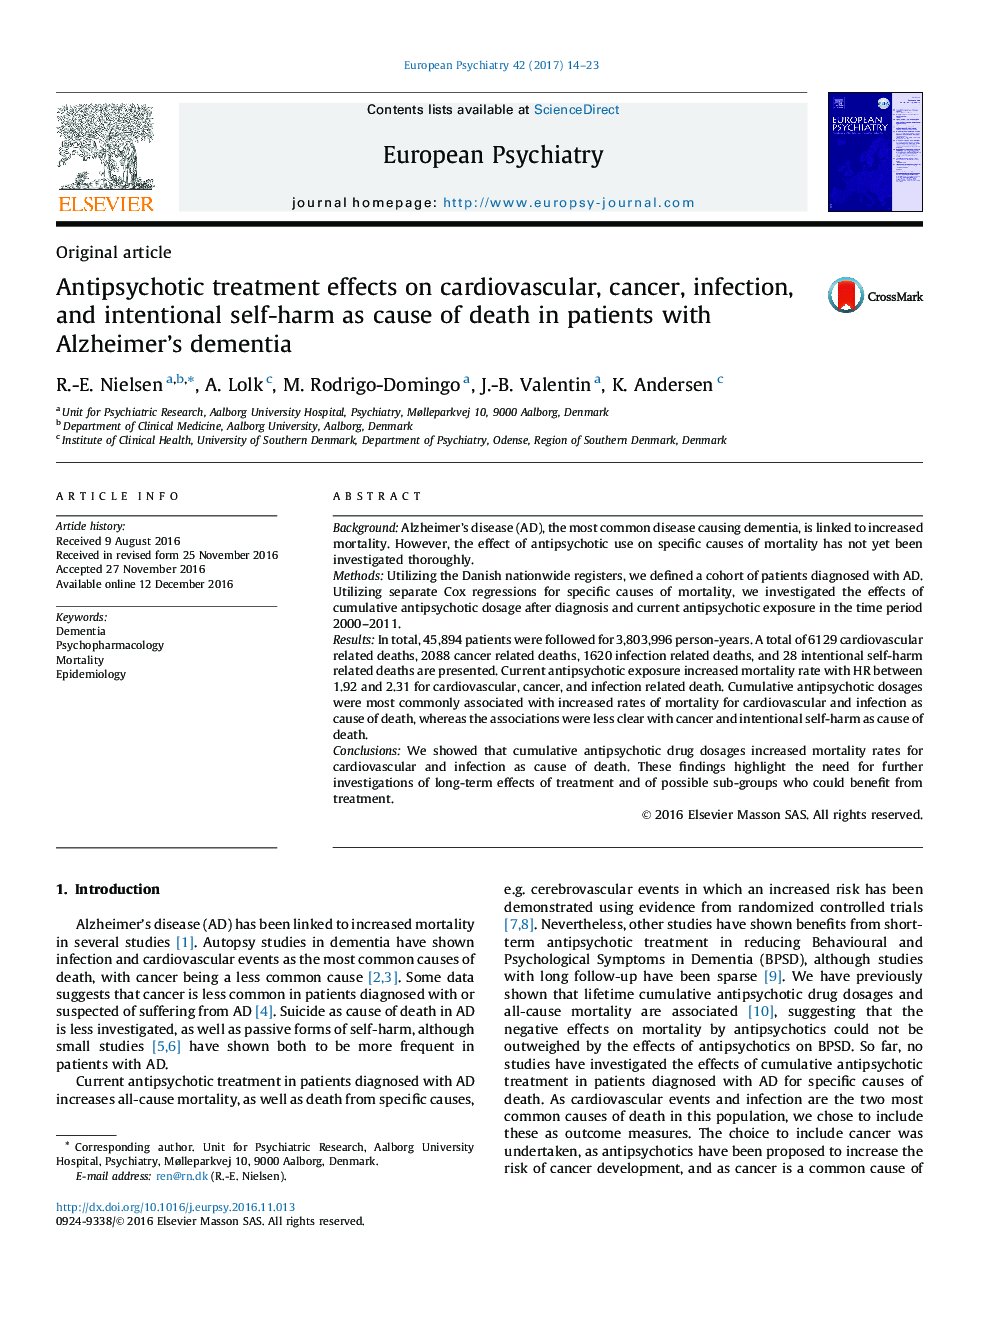 Original articleAntipsychotic treatment effects on cardiovascular, cancer, infection, and intentional self-harm as cause of death in patients with Alzheimer's dementia